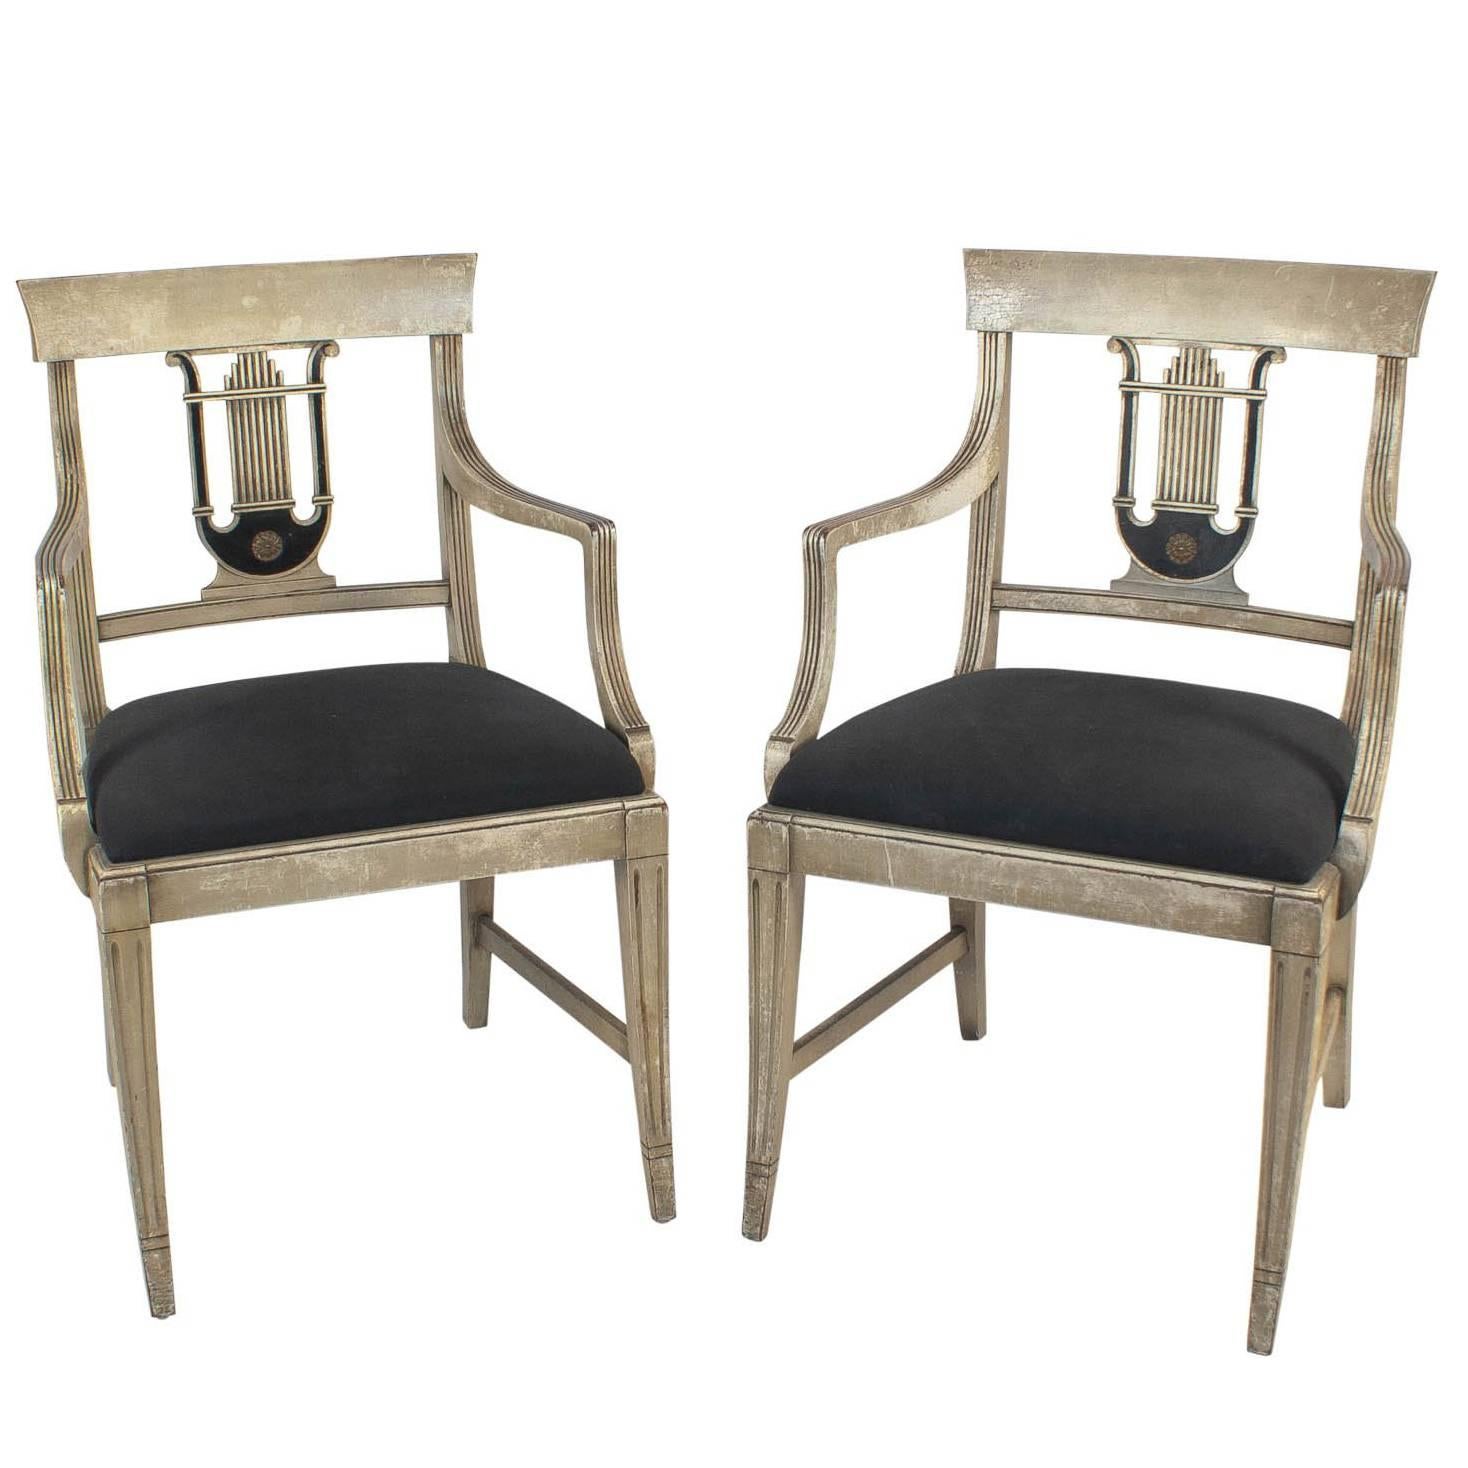 Pair of Hollywood Regency Painted Armchairs in Gray and Black, circa 1940